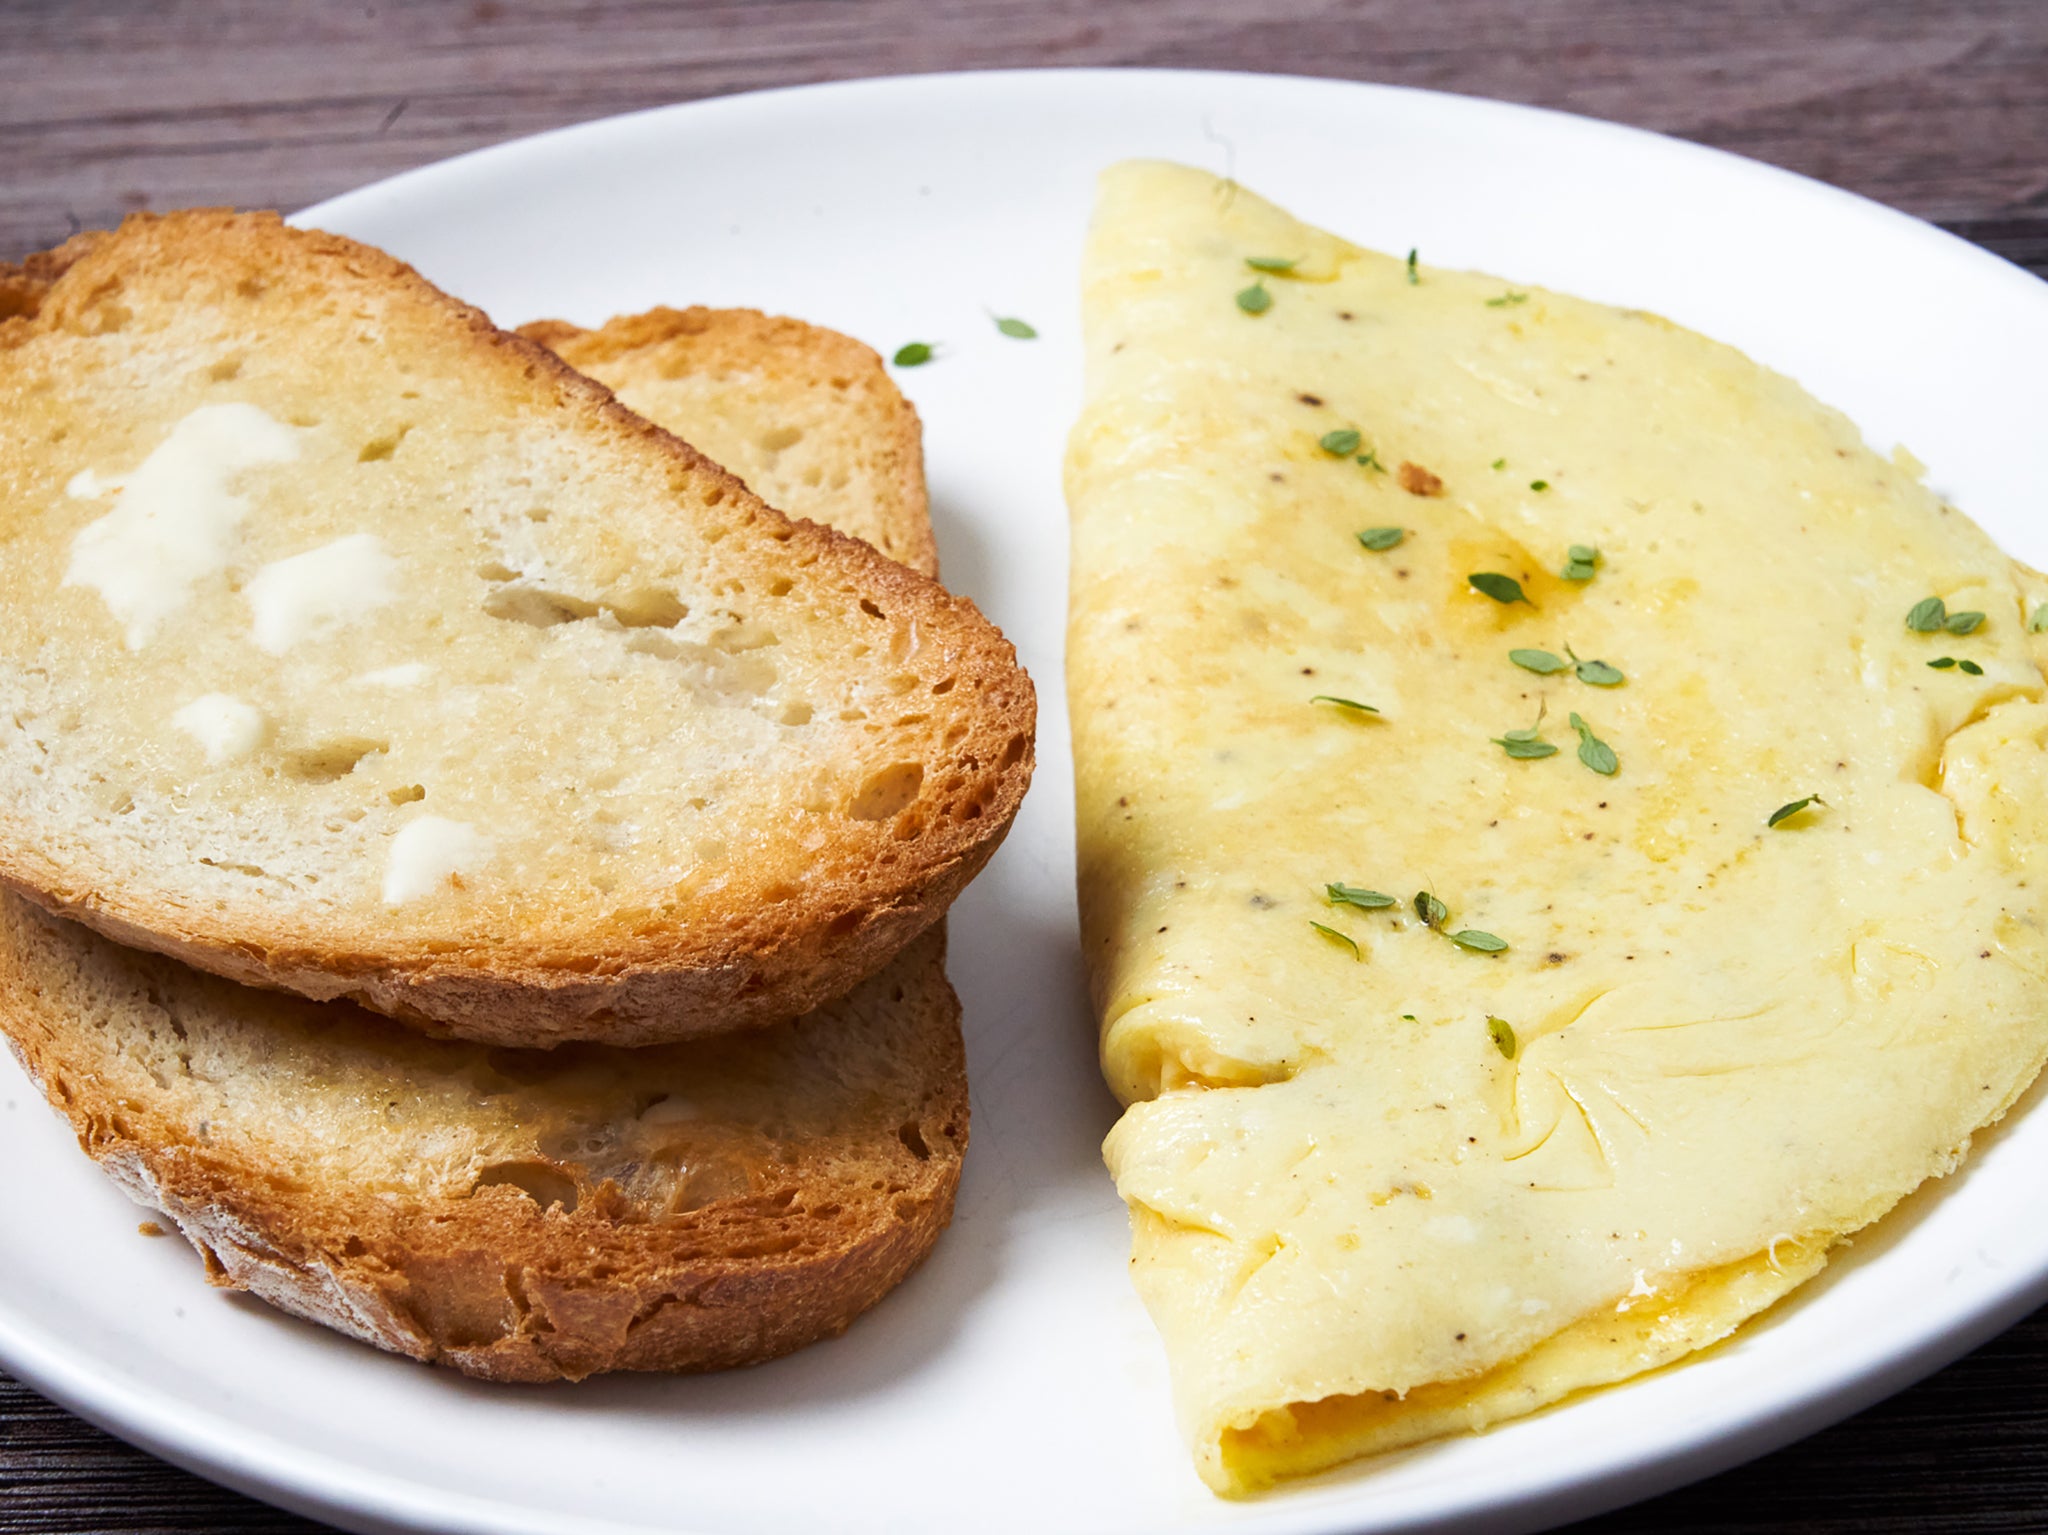 https://static.independent.co.uk/2022/08/15/15/food-omelet-cb23fab2-0c40-11ed-bf3a-cdf532019c52.jpg